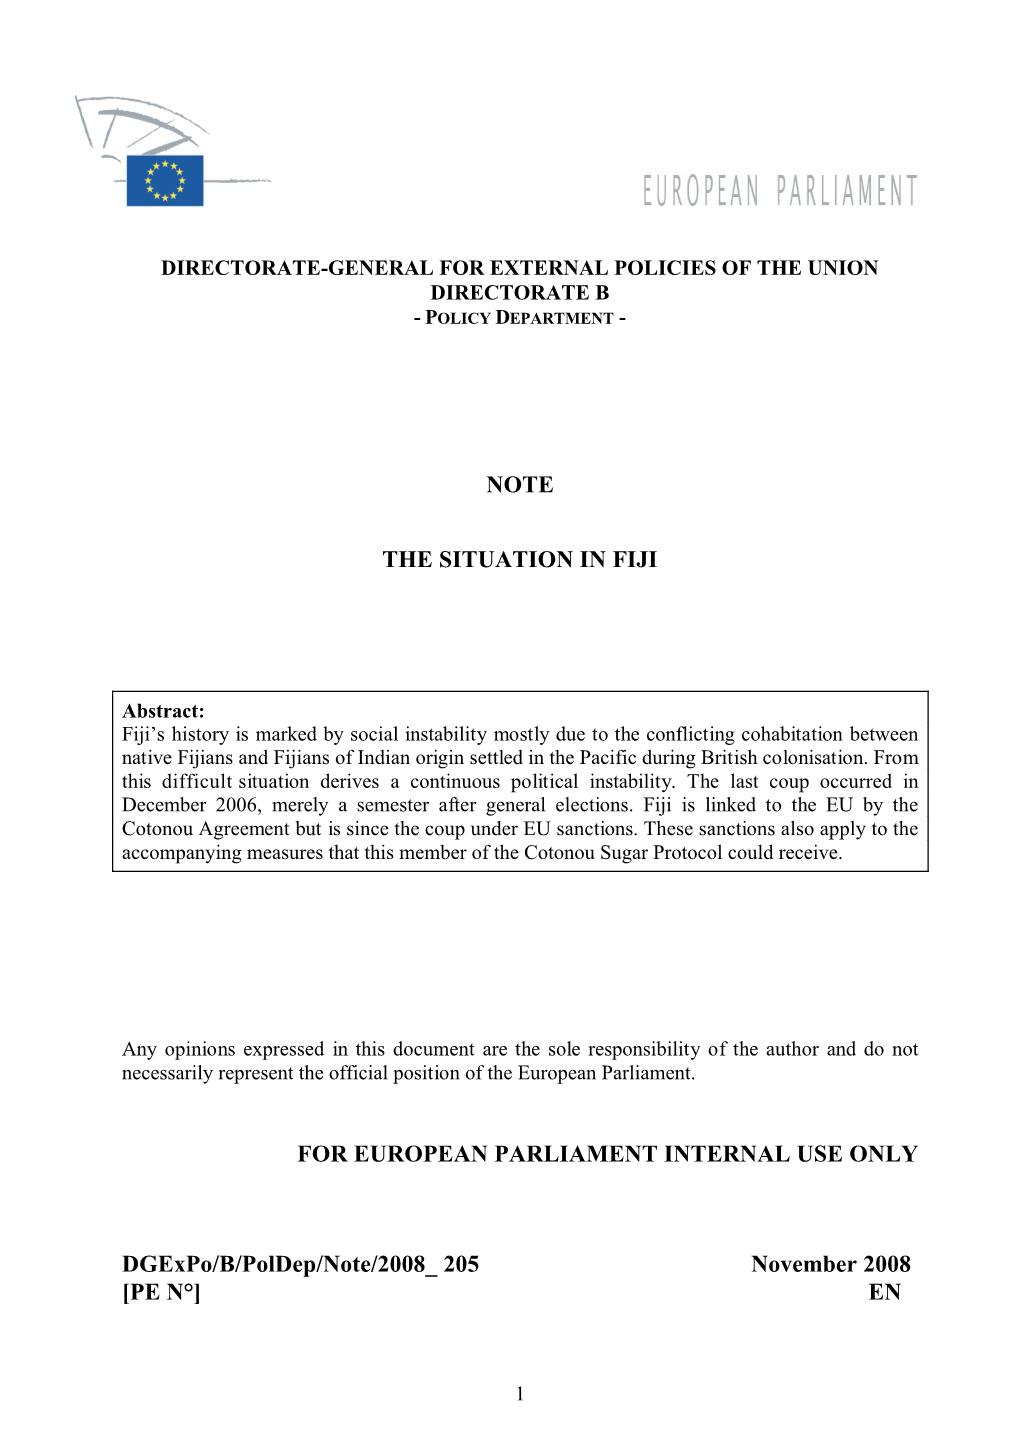 NOTE the SITUATION in FIJI for EUROPEAN PARLIAMENT INTERNAL USE ONLY Dgexpo/B/Poldep/Note/2008 205 November 2008 [PE N°] EN